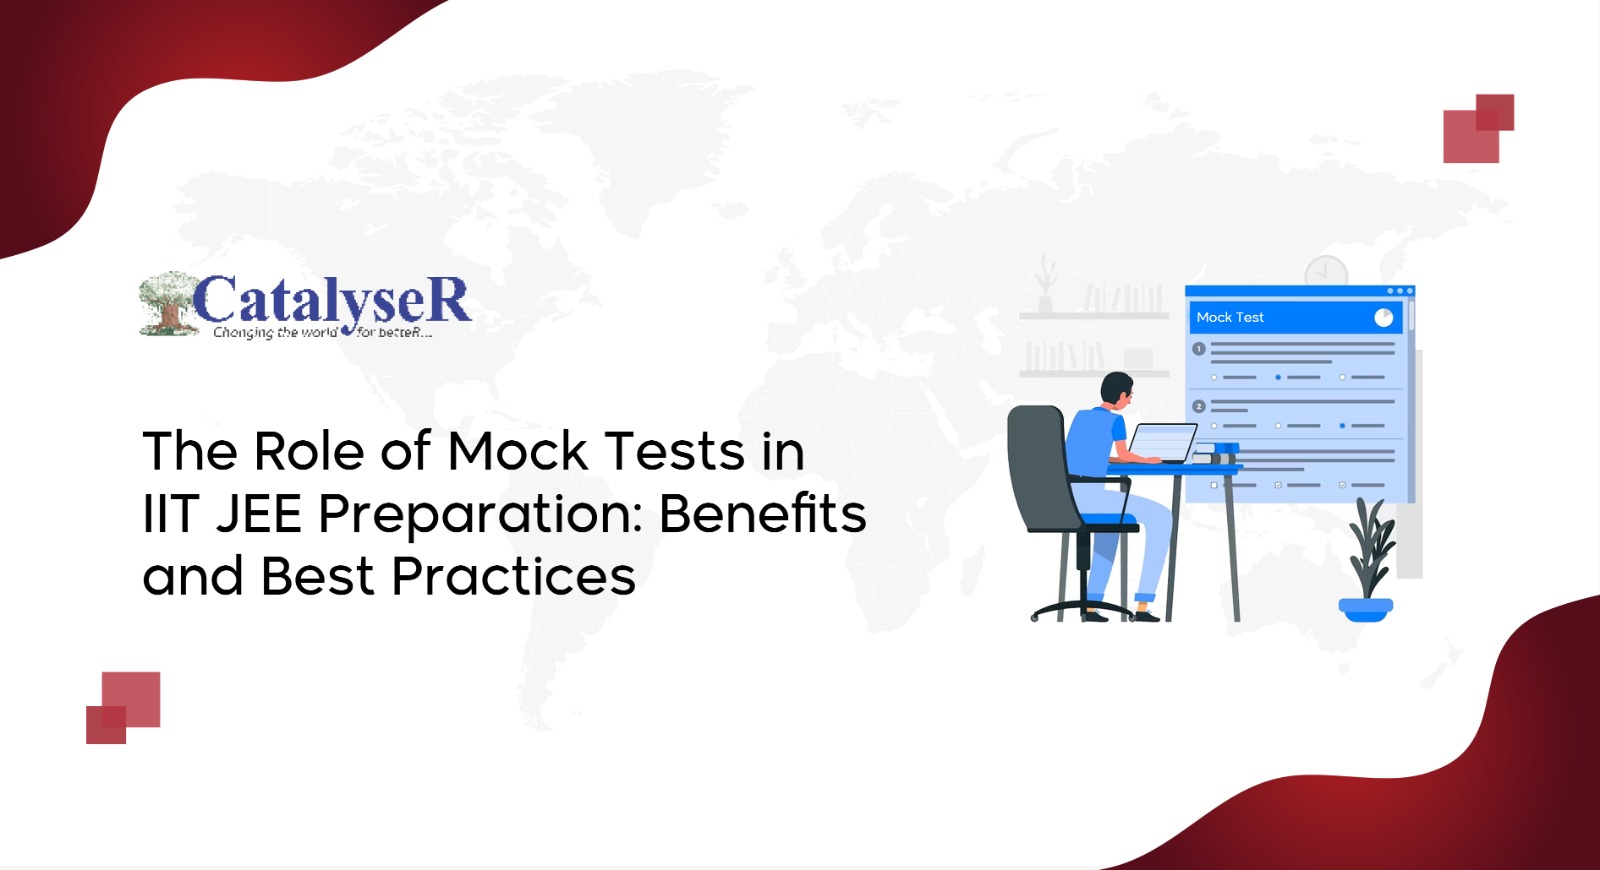 The Role of Mock Tests in IIT JEE Preparation: Benefits and Best Practices